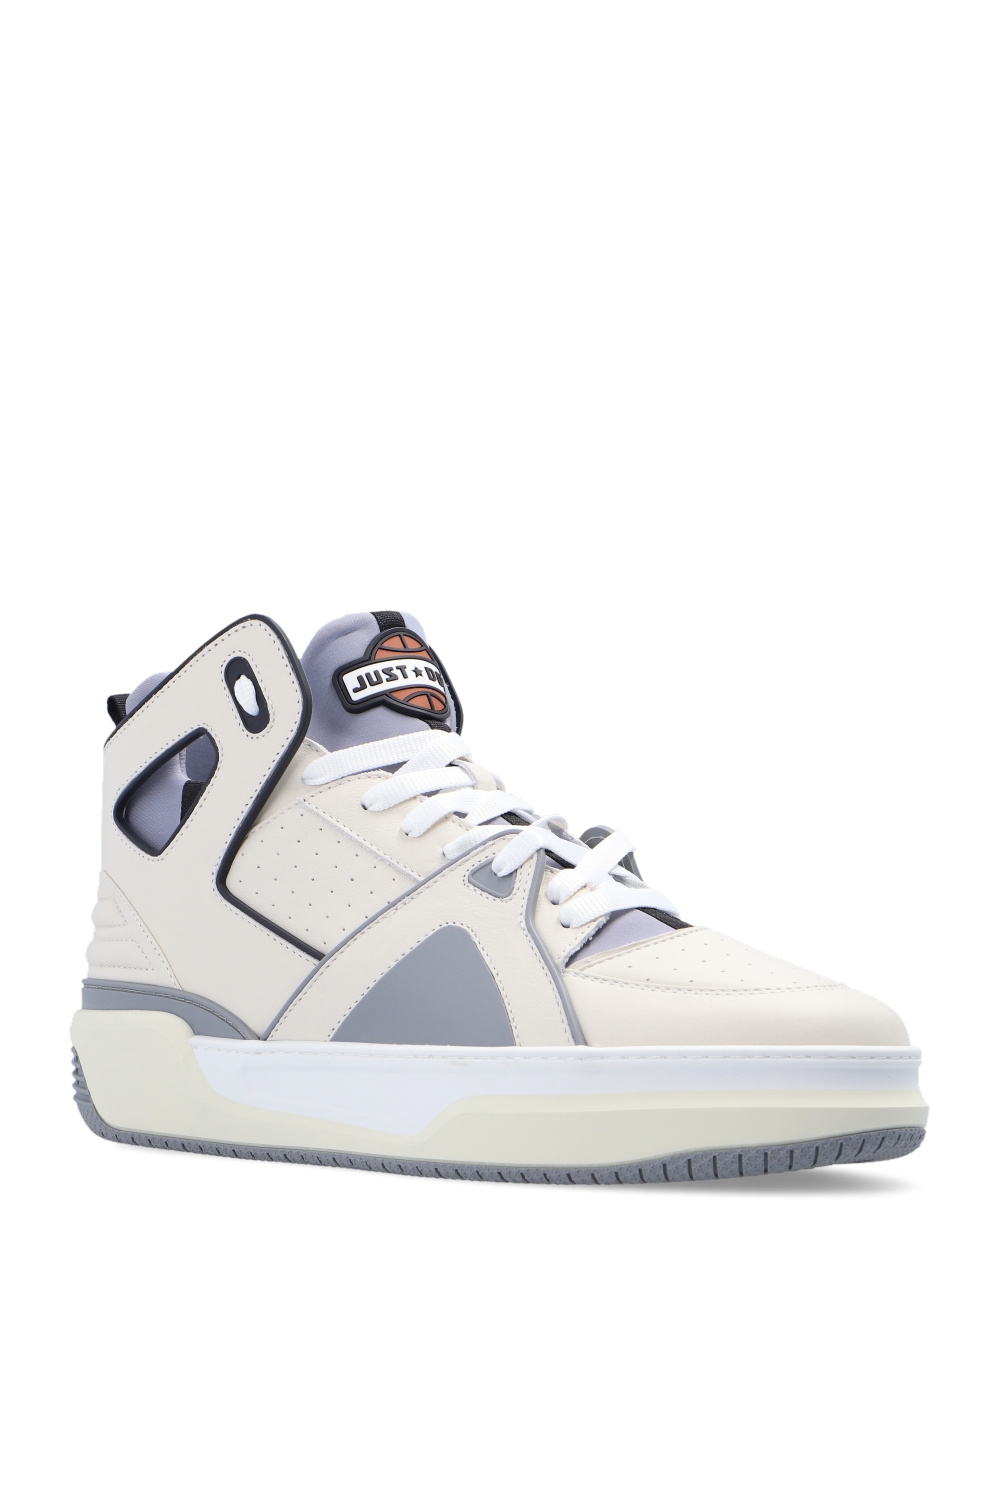 Just Don 'Basketball Jd1' sneakers | Men's Shoes | Vitkac